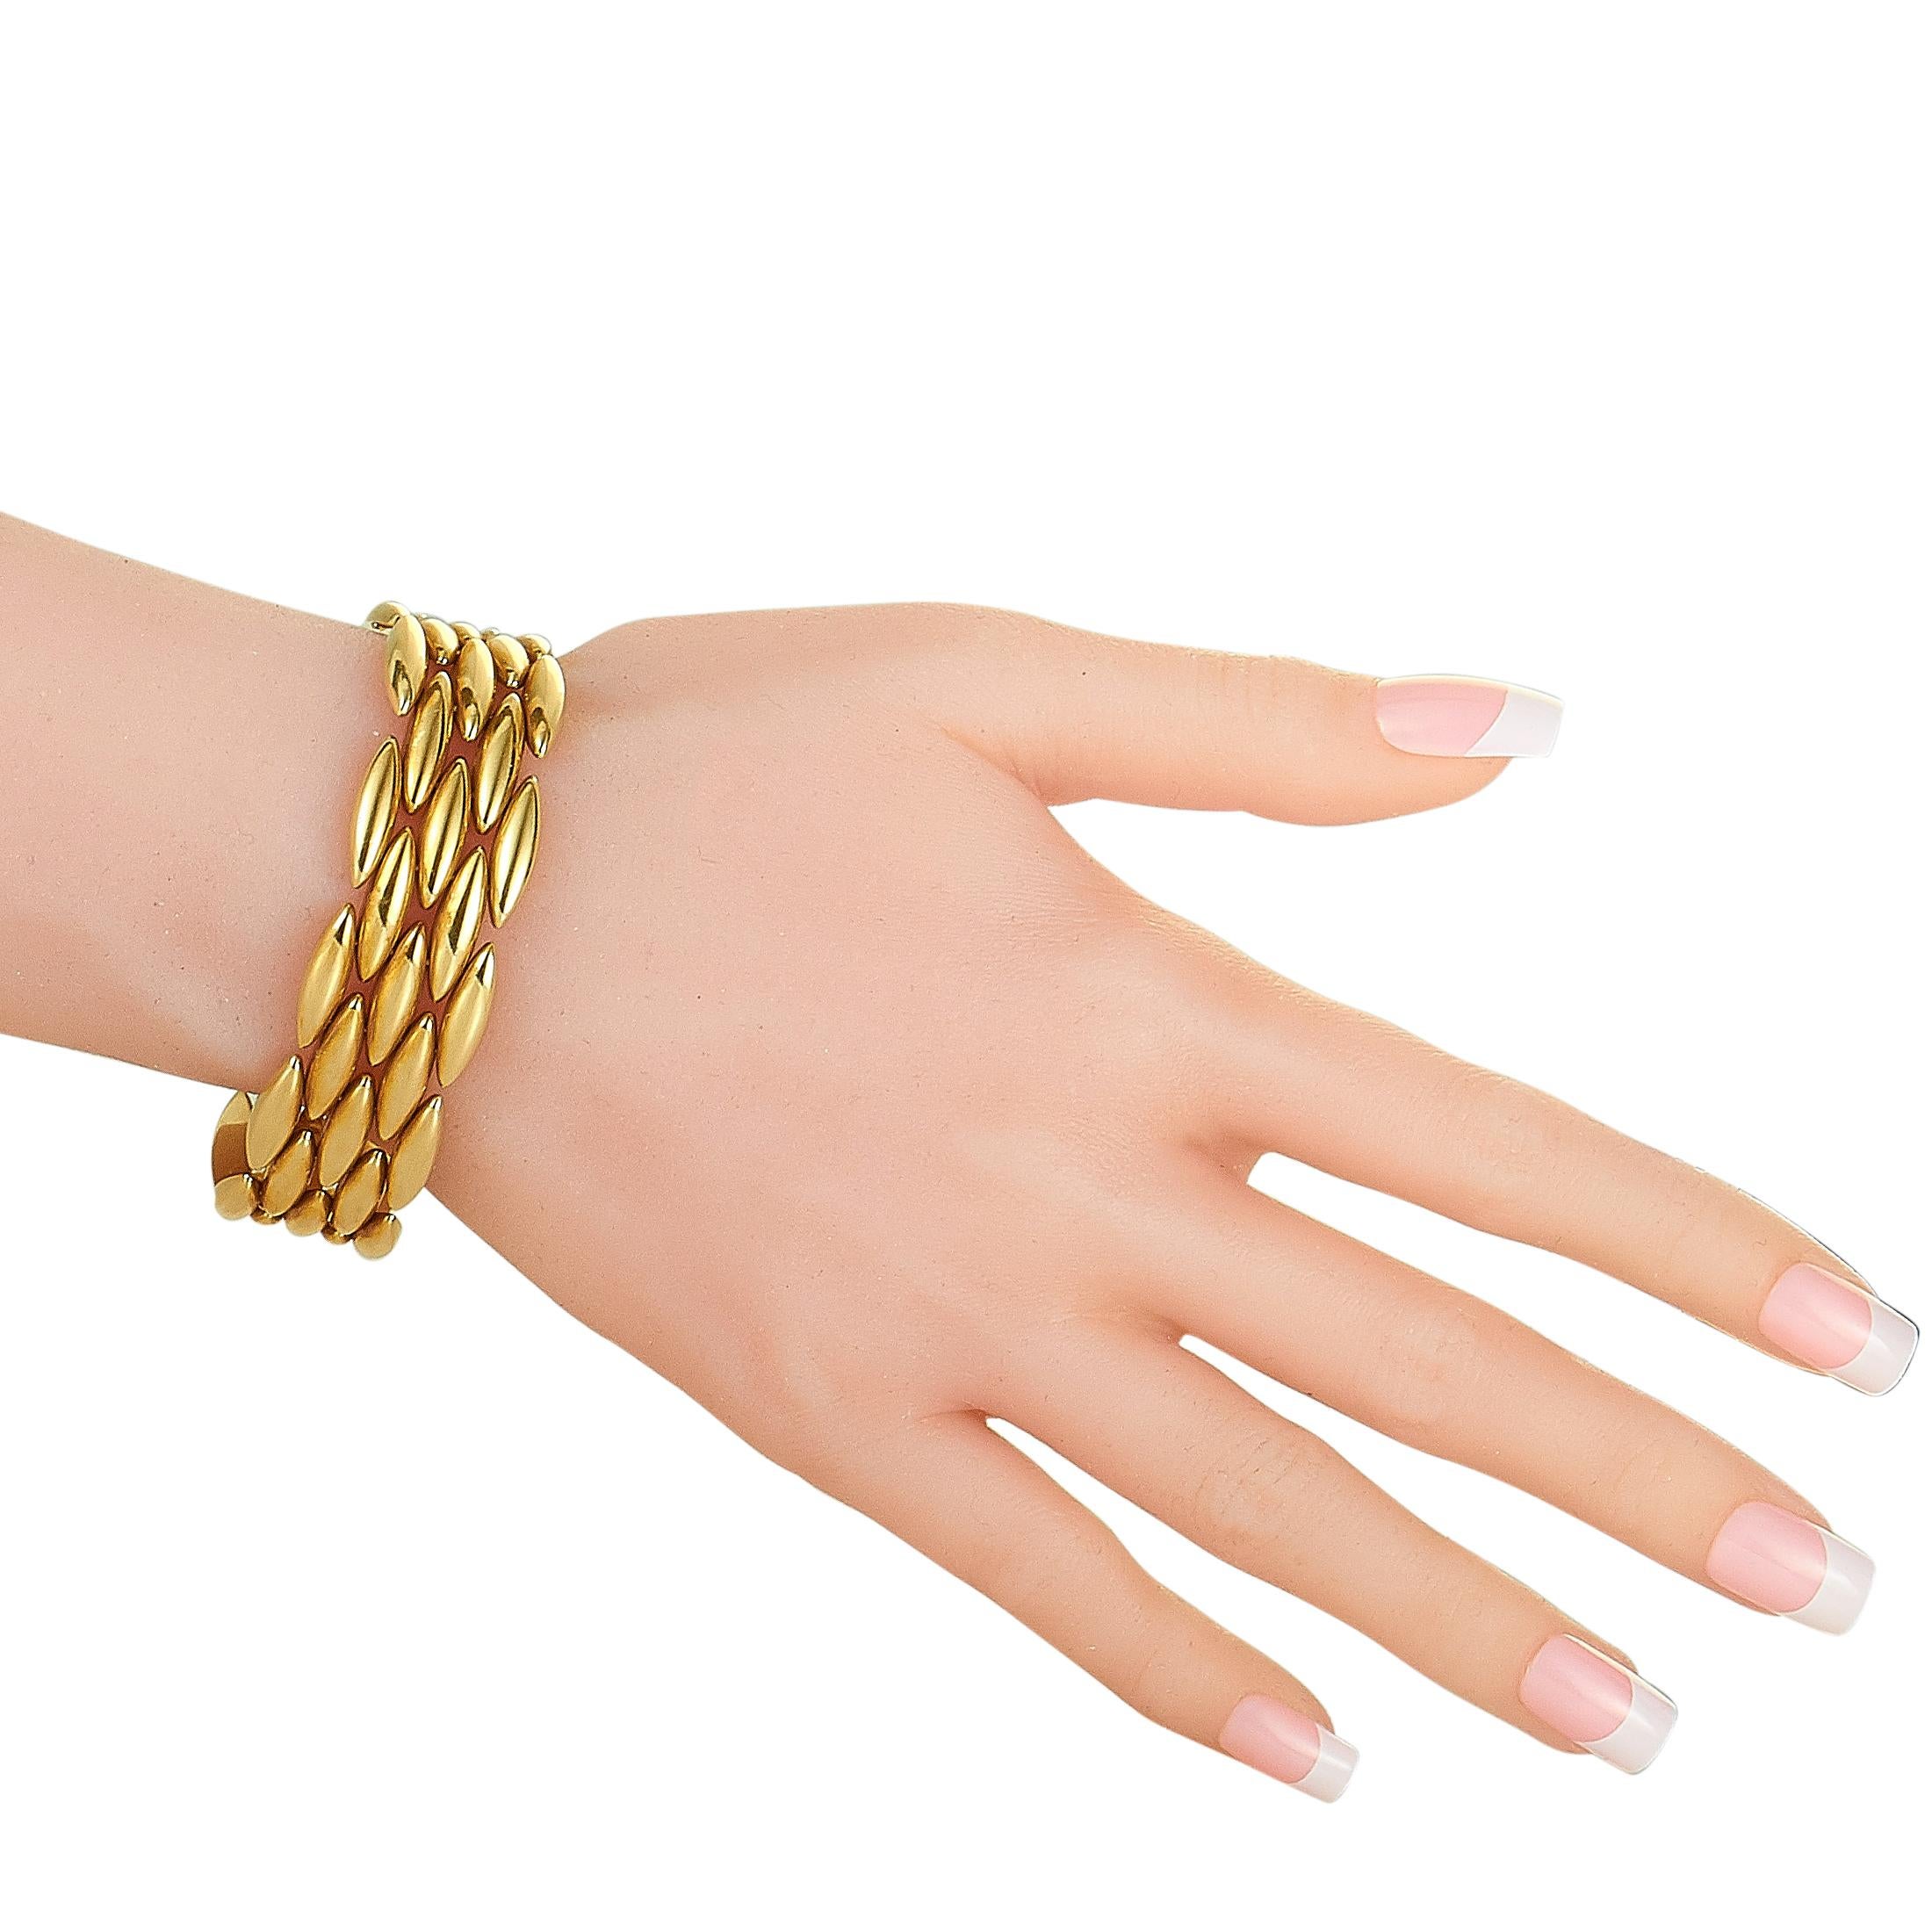 The Cartier “Maillon Panthère” bracelet is crafted from 18K yellow gold and weighs 48.6 grams, measuring 7” in length.

This jewelry piece is offered in estate condition and includes the manufacturer’s box.